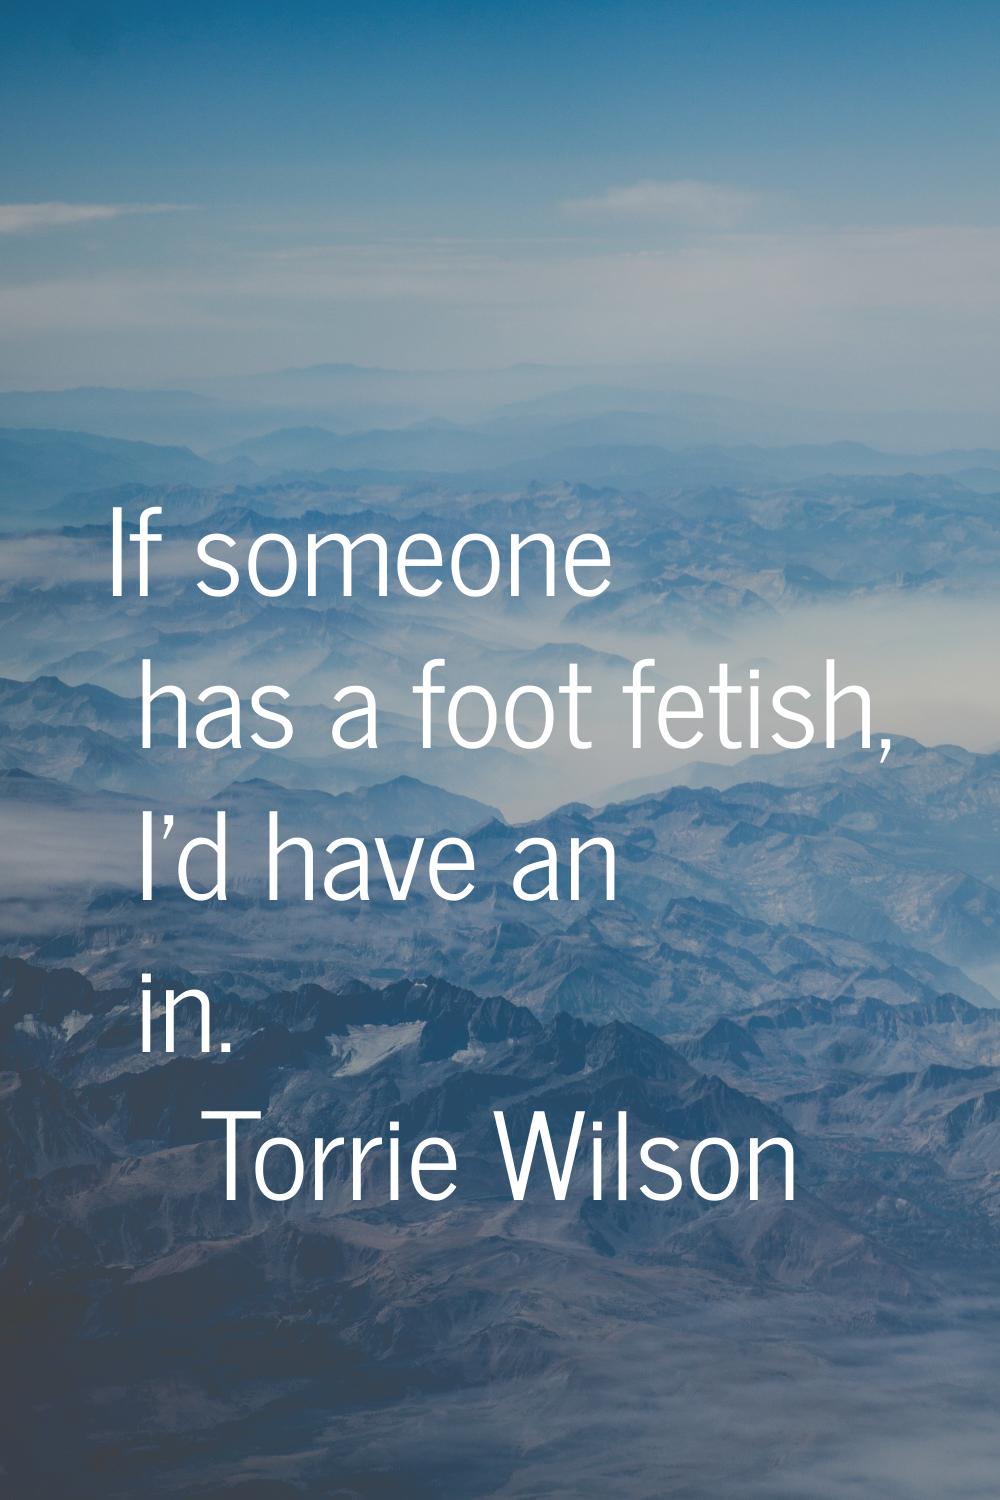 If someone has a foot fetish, I'd have an in.